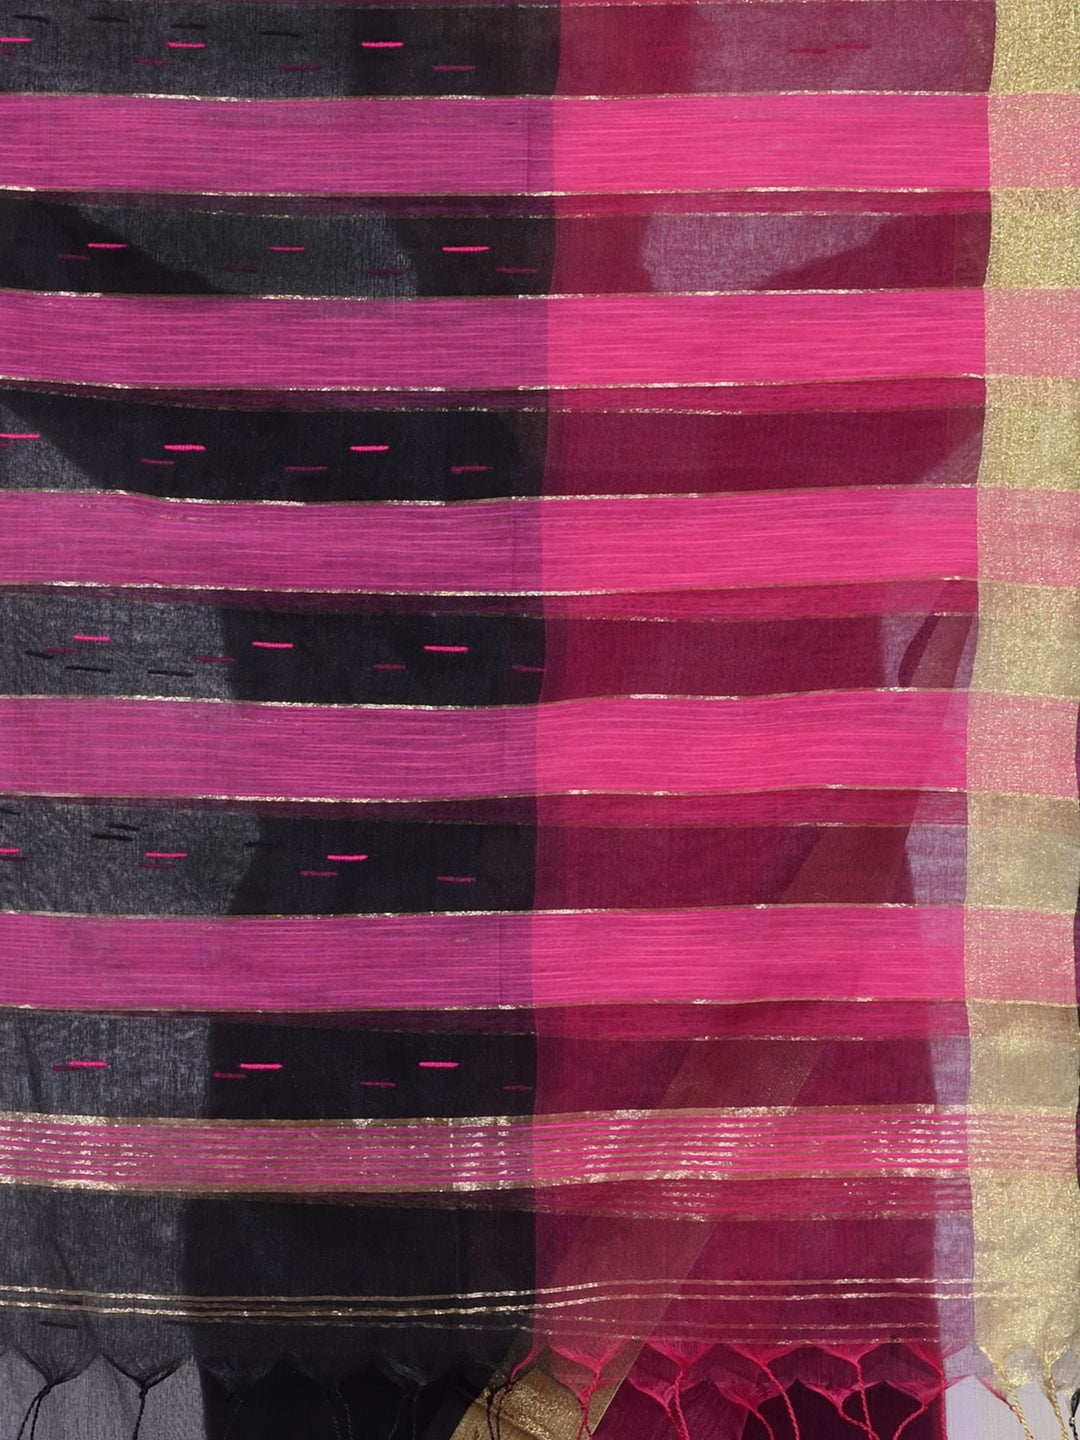 CHARUKRITI Black and Fuchsia Pink Blended Cotton Handwoven Saree Zari Border with Unstitched Blouse